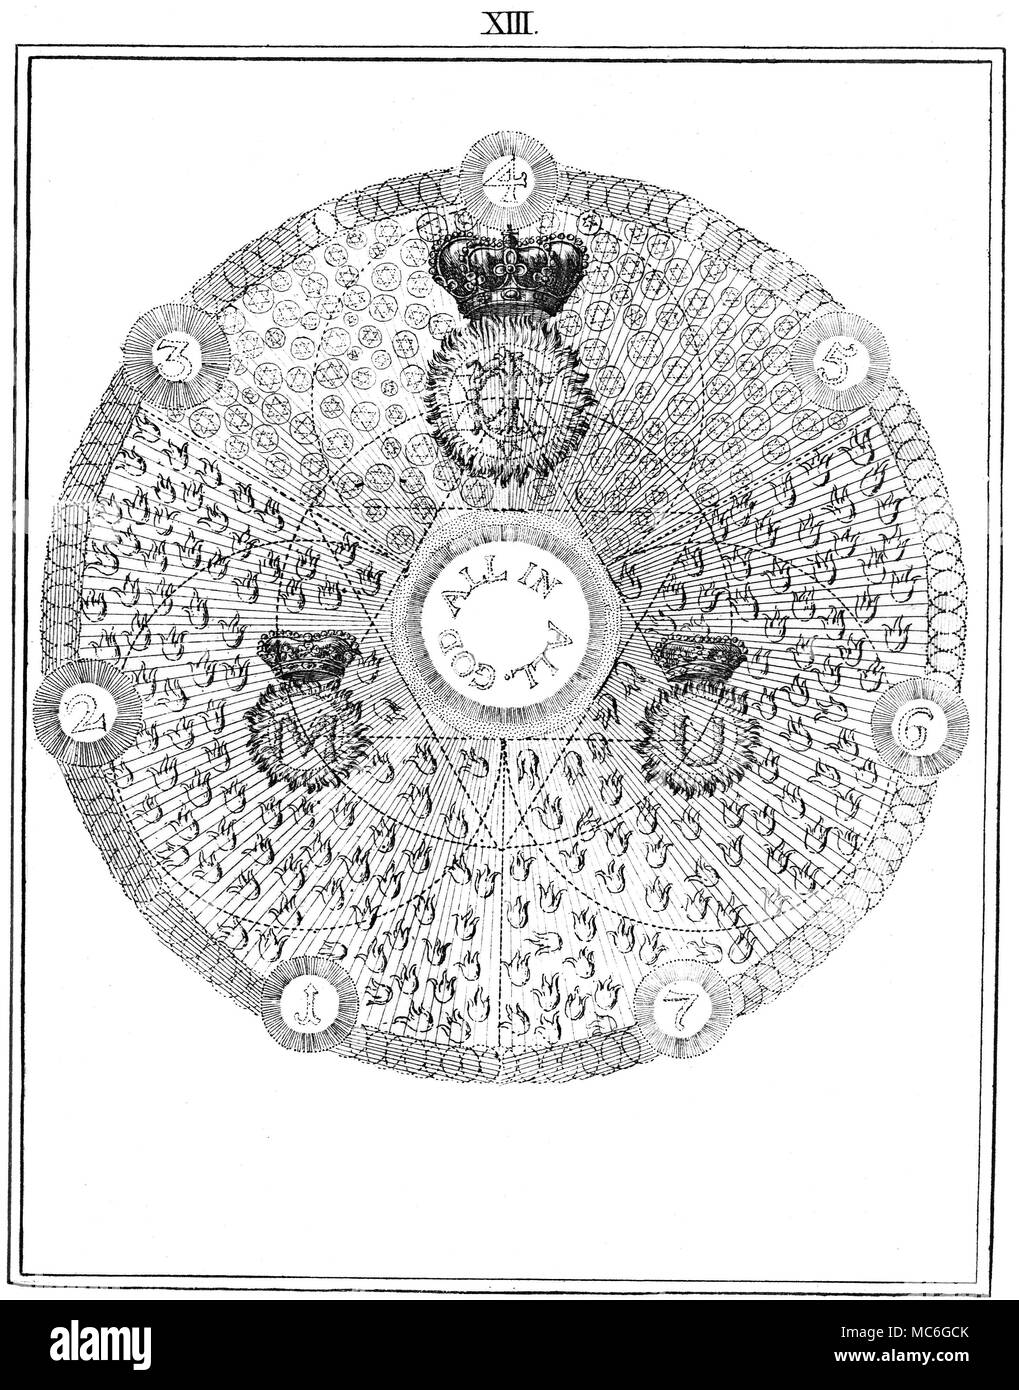 SYMBOLS - OCCULT ART - ROSICRUCIANS - SPIRALS One of a series of influential occult engravings by William Law, in explication of the principles in the arcane thought of the Rosicrucian, Jacob Boehme, from The Works of Jacob Behmen, The Teutonic Theosopher, Vol 1, 1764. Plate 13. The reconciliation of opposites hinted at in the previous plate is now effective. Boehme tells us that the third Hierarchy, which Lucifer destroyed, is re-made, and the time has come when there will be Time no more, and GOD shall be All in All. The primal symbolism of this future state is reflected in the symbol o Stock Photo